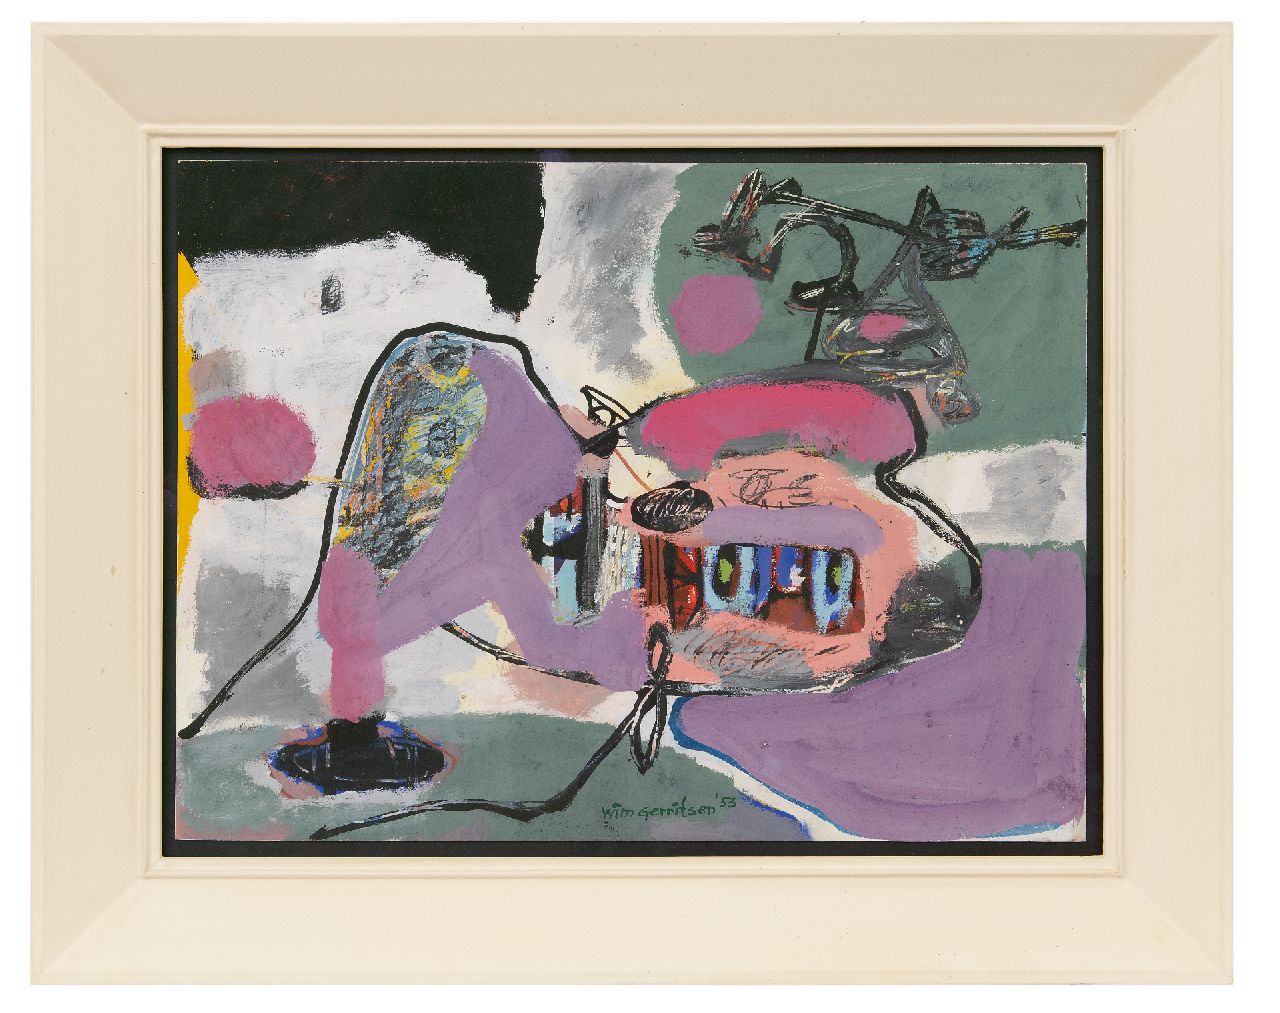 Gerritsen W.  | Wilhelm 'Wim' Gerritsen | Watercolours and drawings offered for sale | Untitled, chalk and gouache on paper 45.4 x 60.8 cm, signed l.c. and dated '53